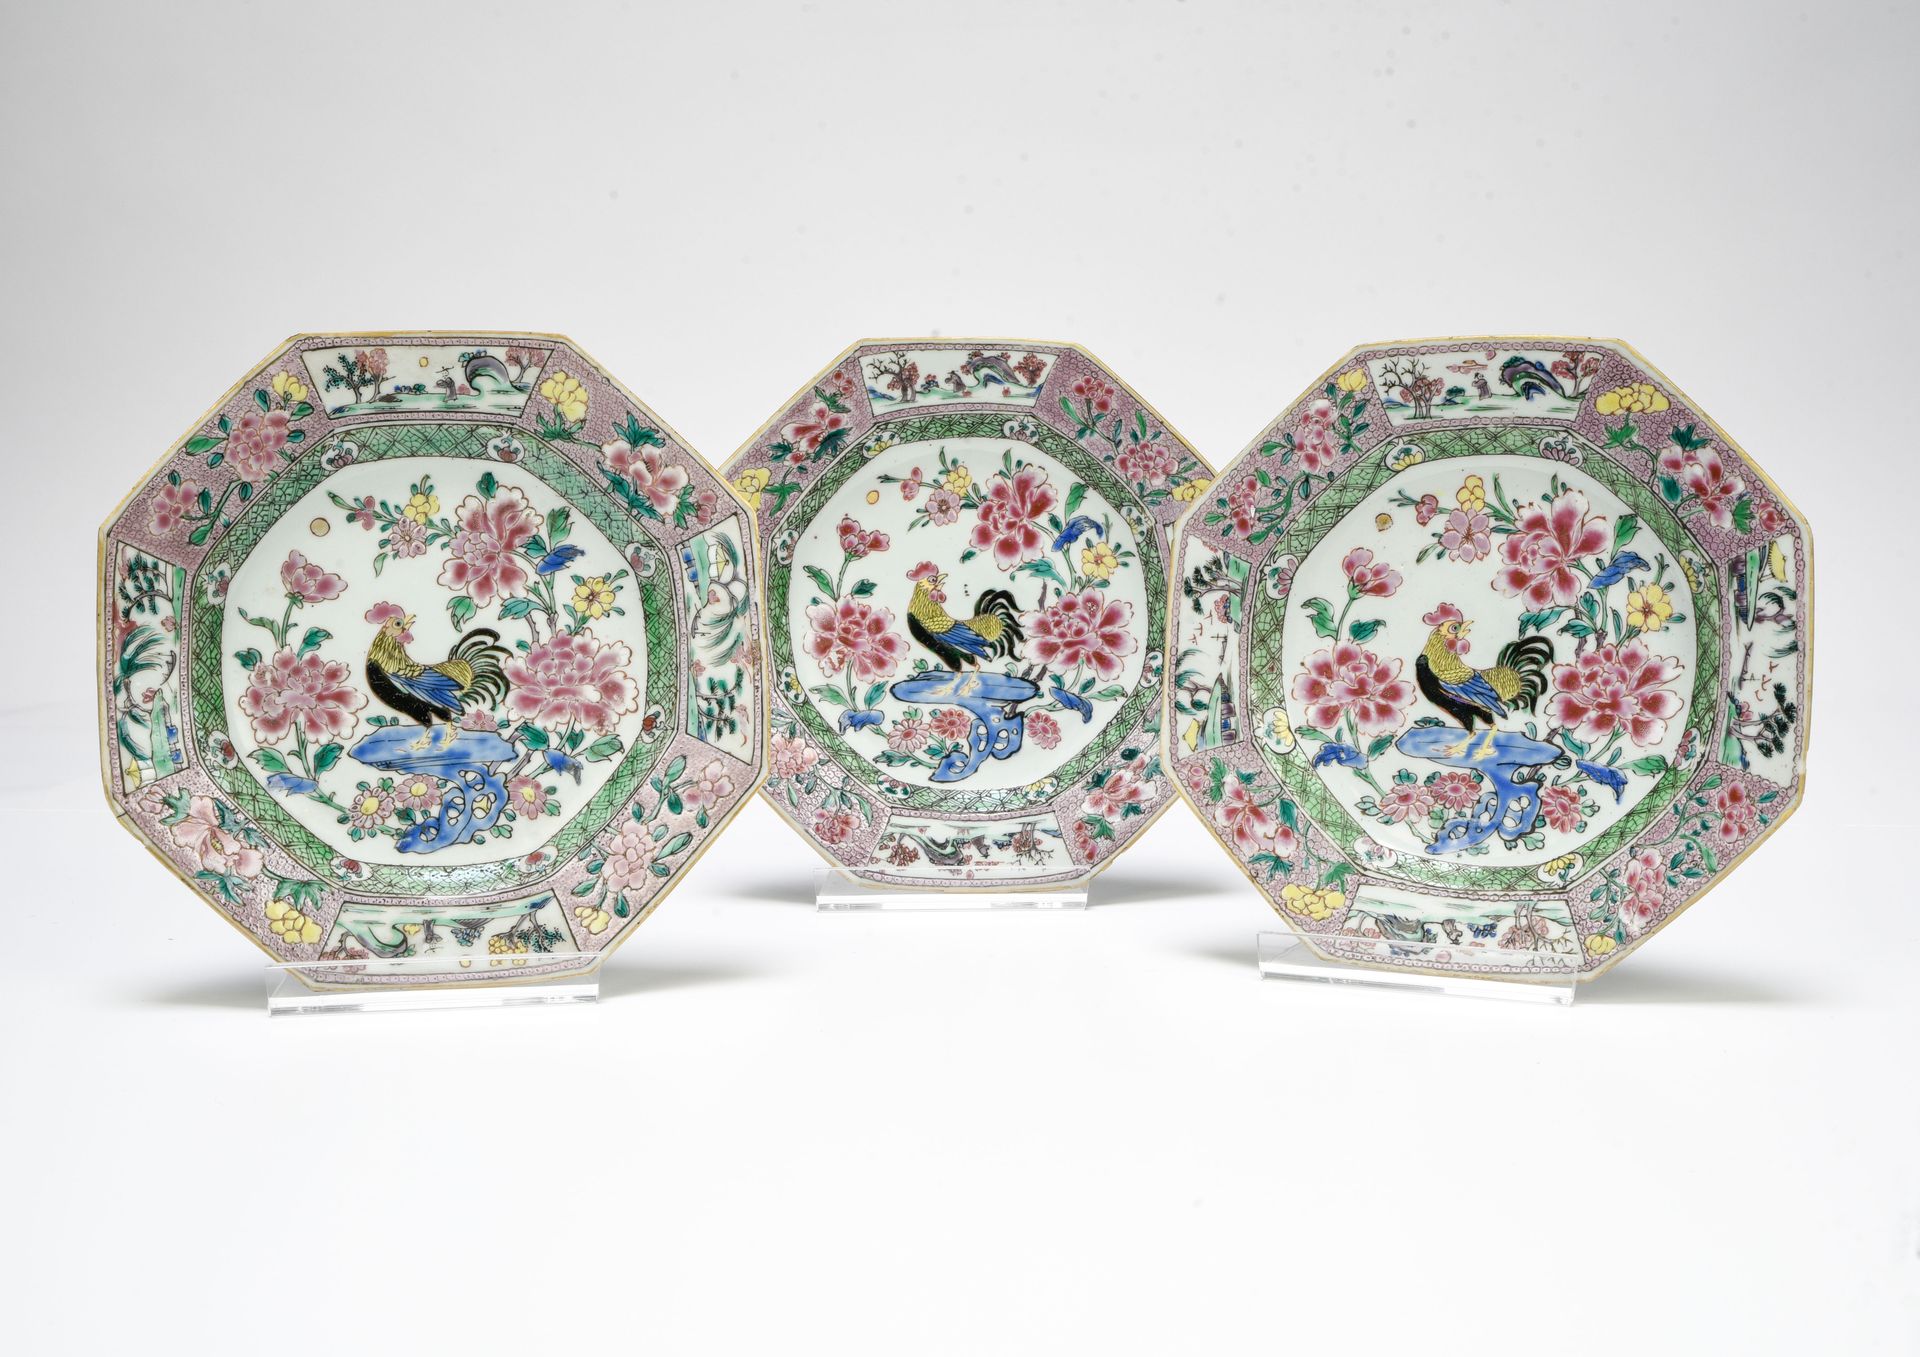 Null CHINA, COMPAGNIE DES INDES - PERIODO YONGZHENG (1723 - 1735)

Tres placas o&hellip;